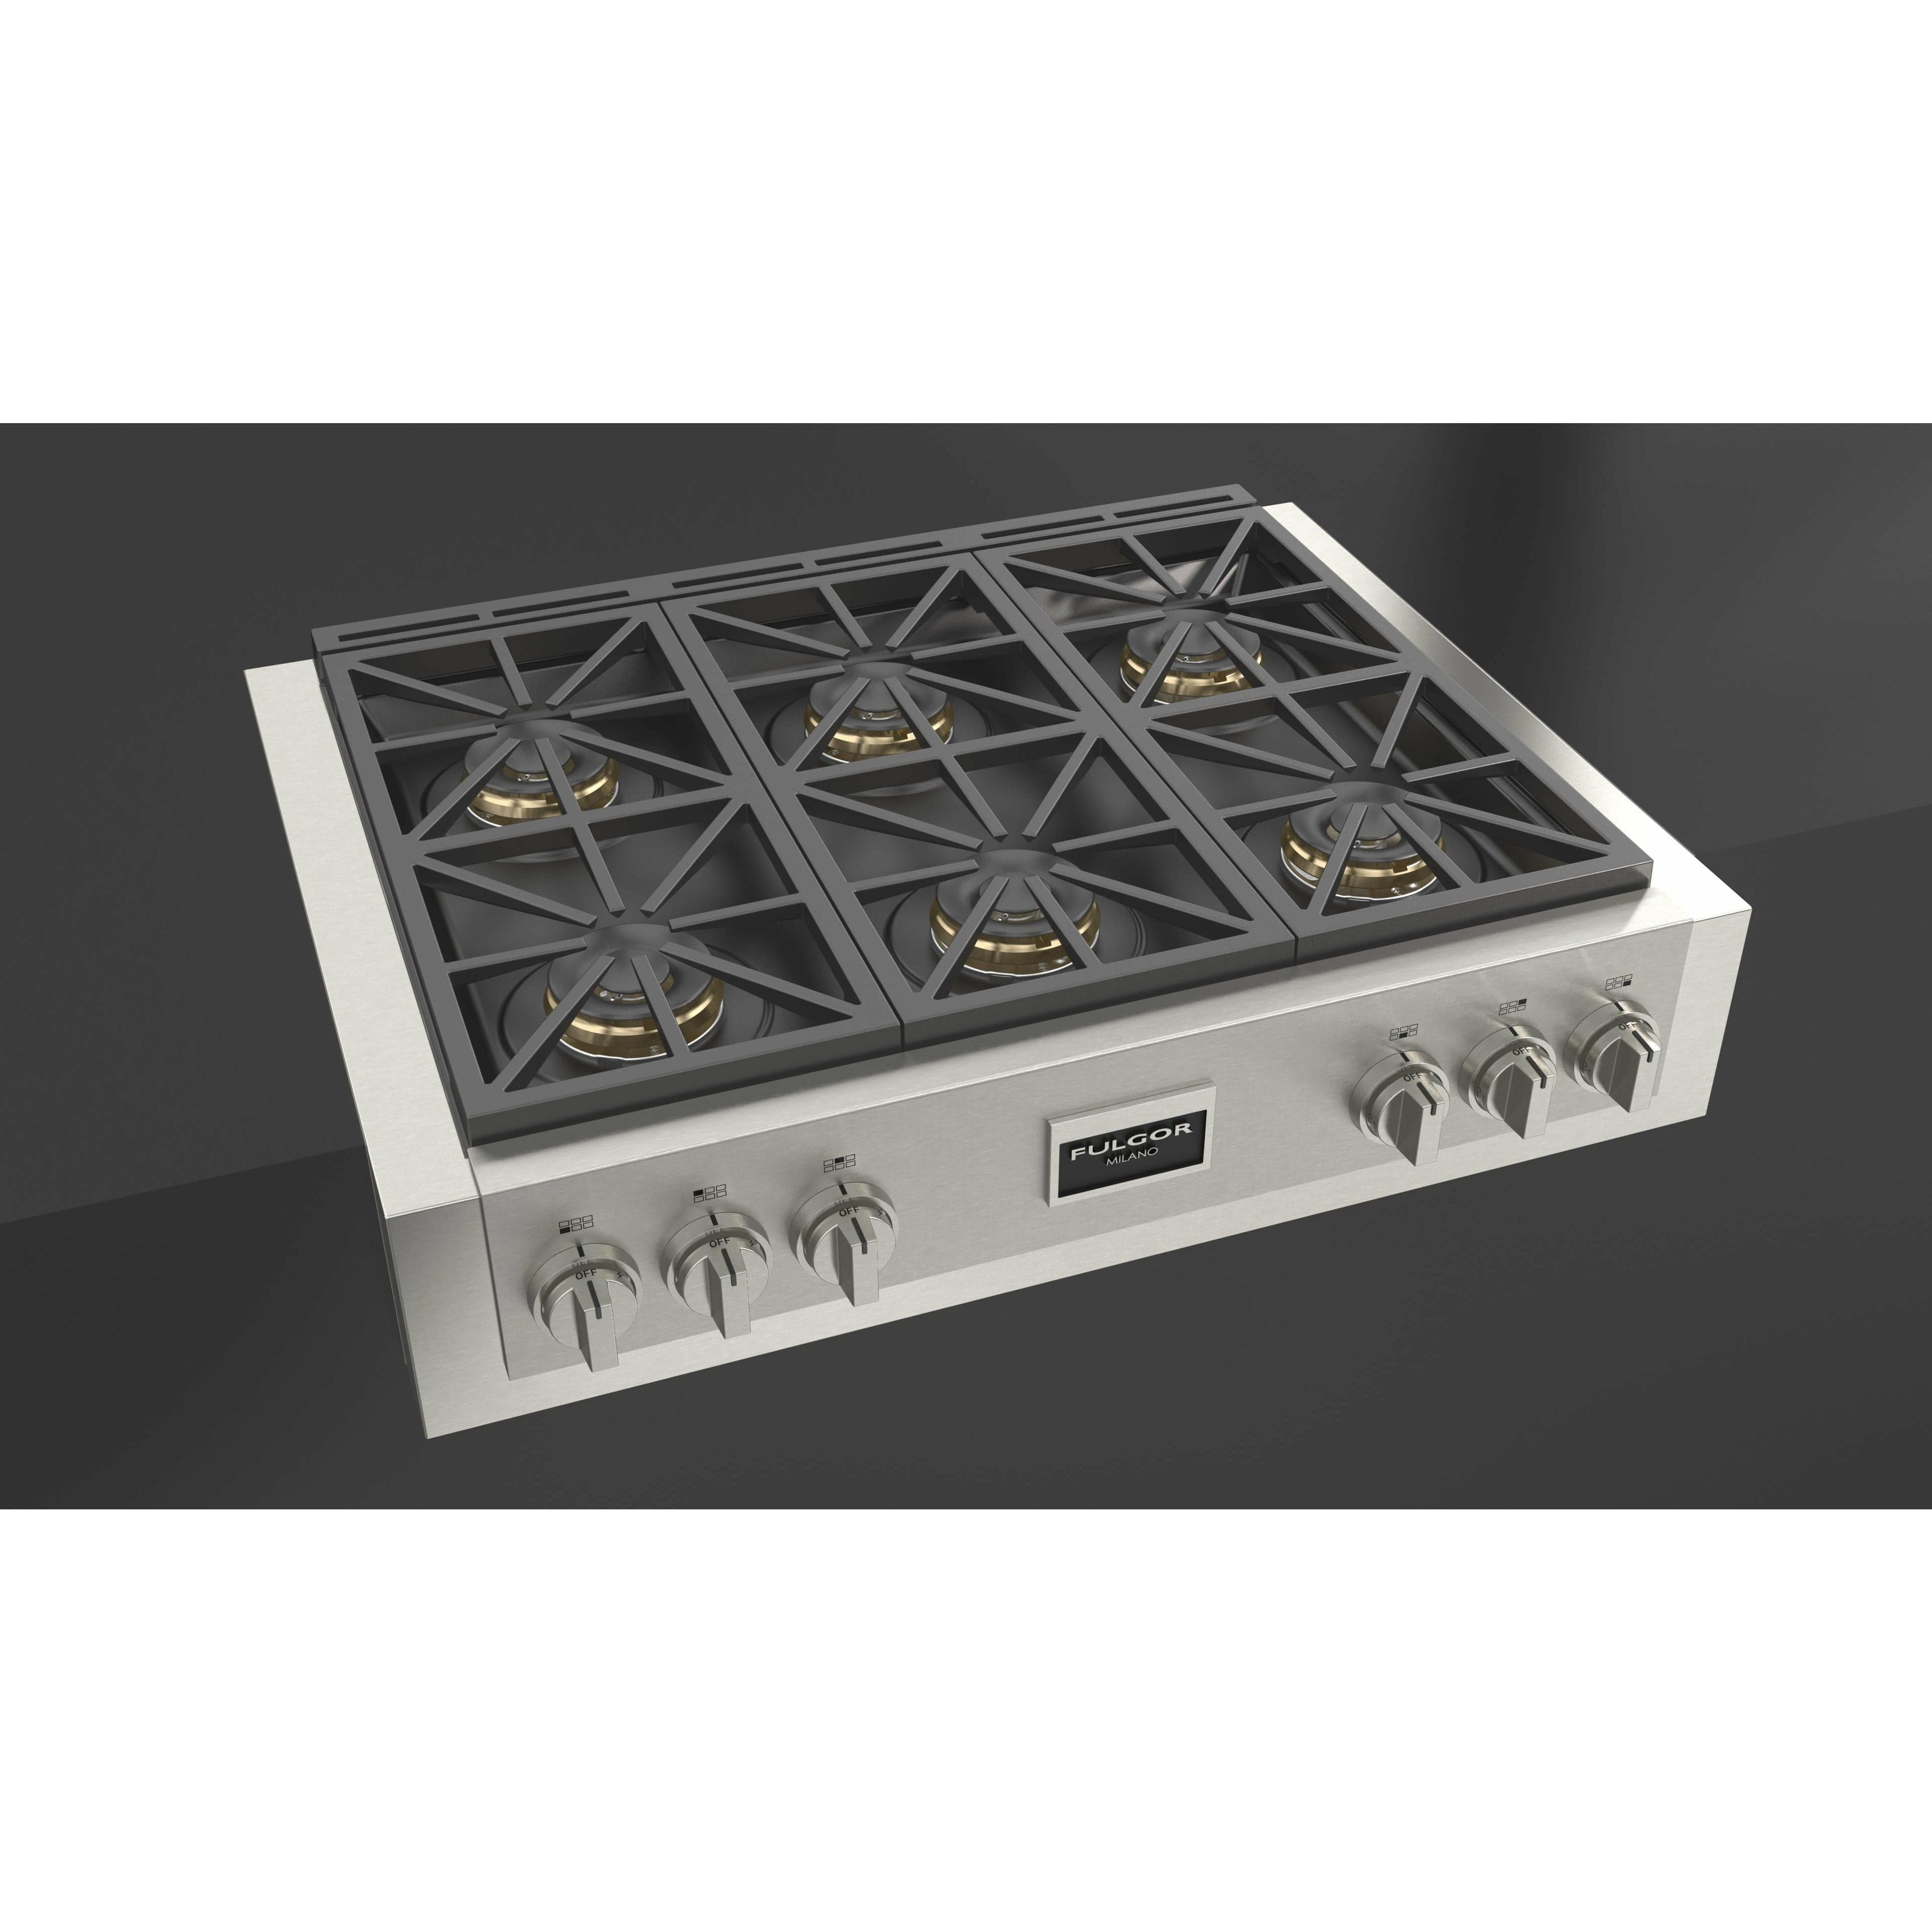 Fulgor Milano 36" Gas Rangetop with 6 Sealed Dual Flame 18,000 BTU Burners, Stainless Steel - F6GRT366S1 Rangetop F6GRT366S1 Luxury Appliances Direct